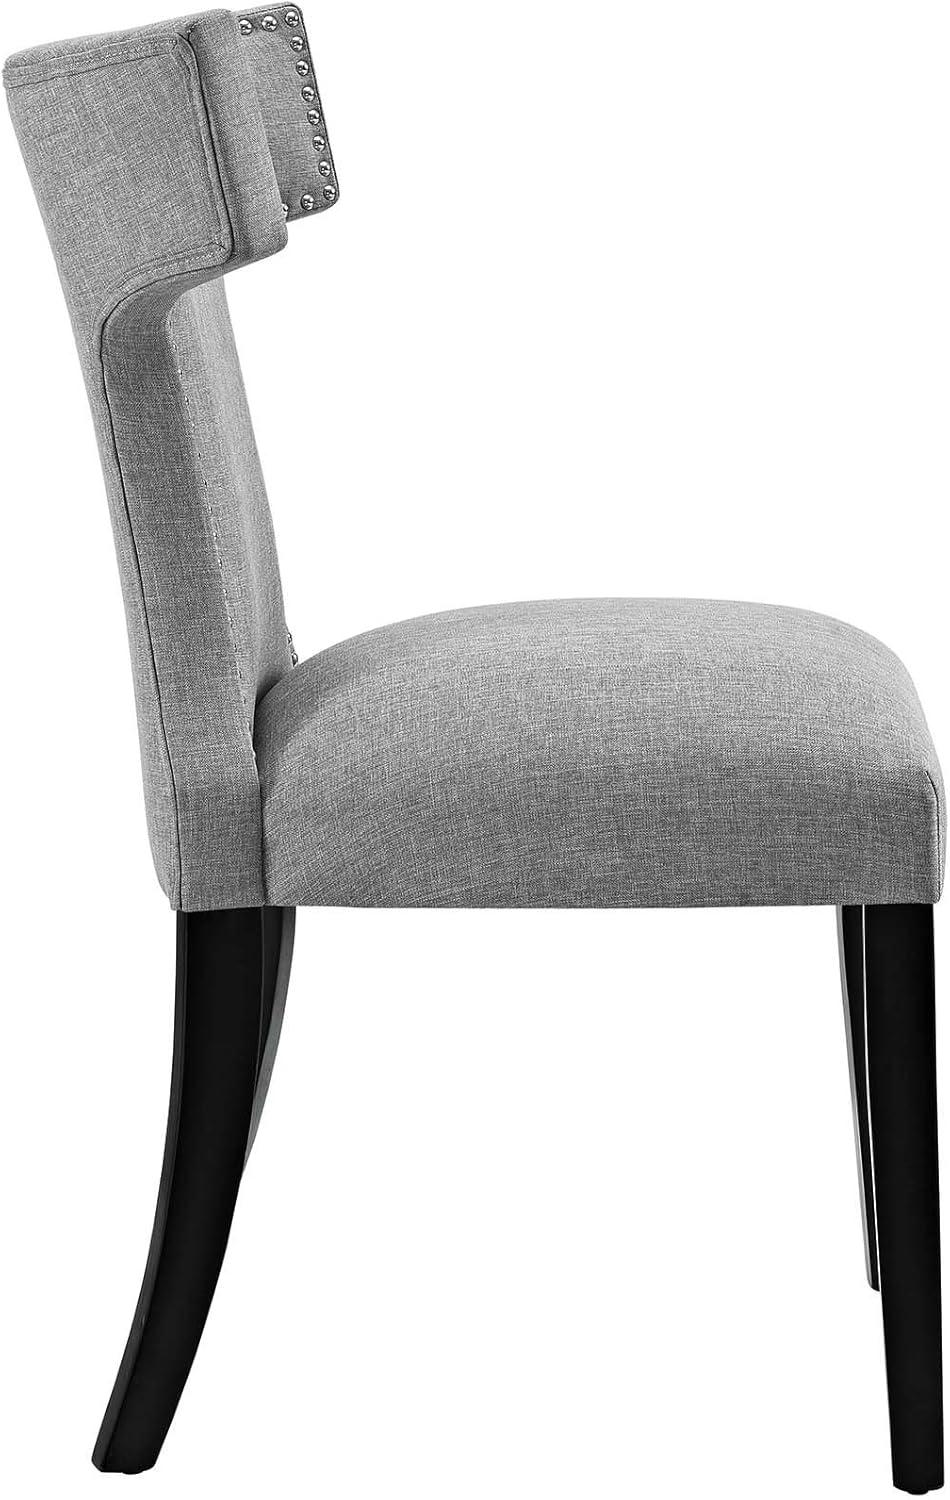 Light Gray Upholstered Wood Side Chair with Nailhead Trim